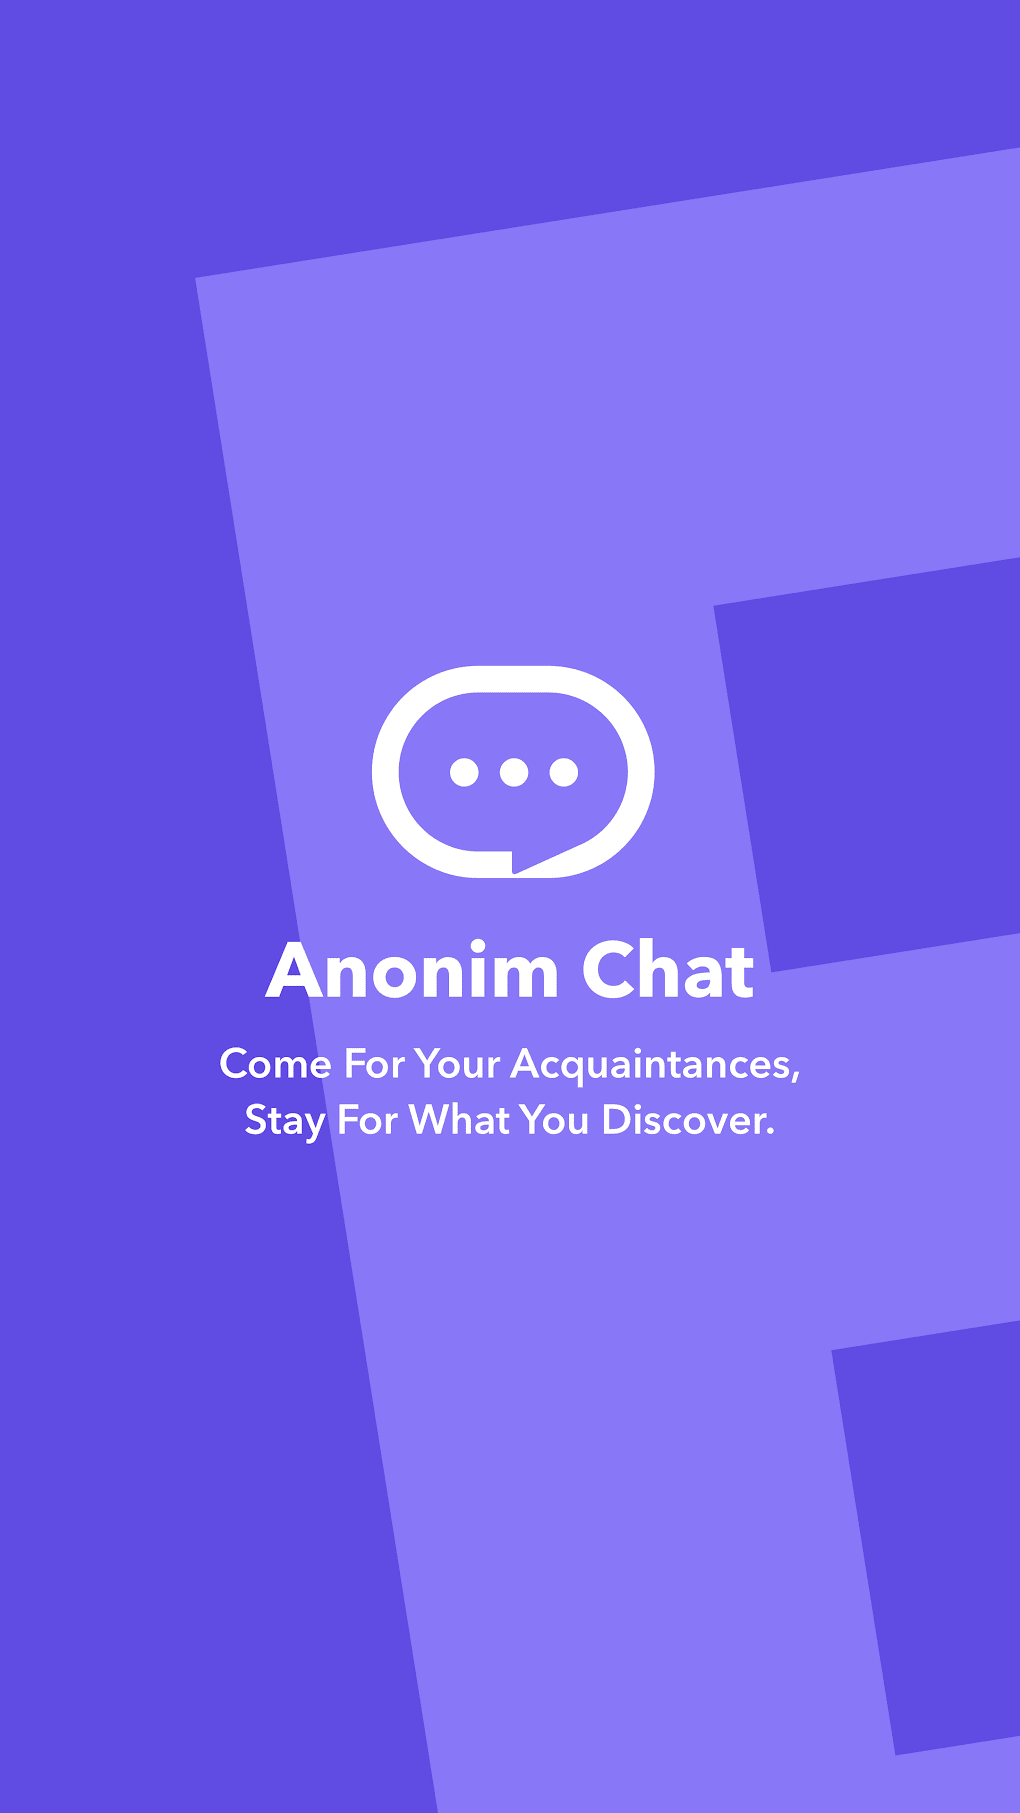 Anoynums chat